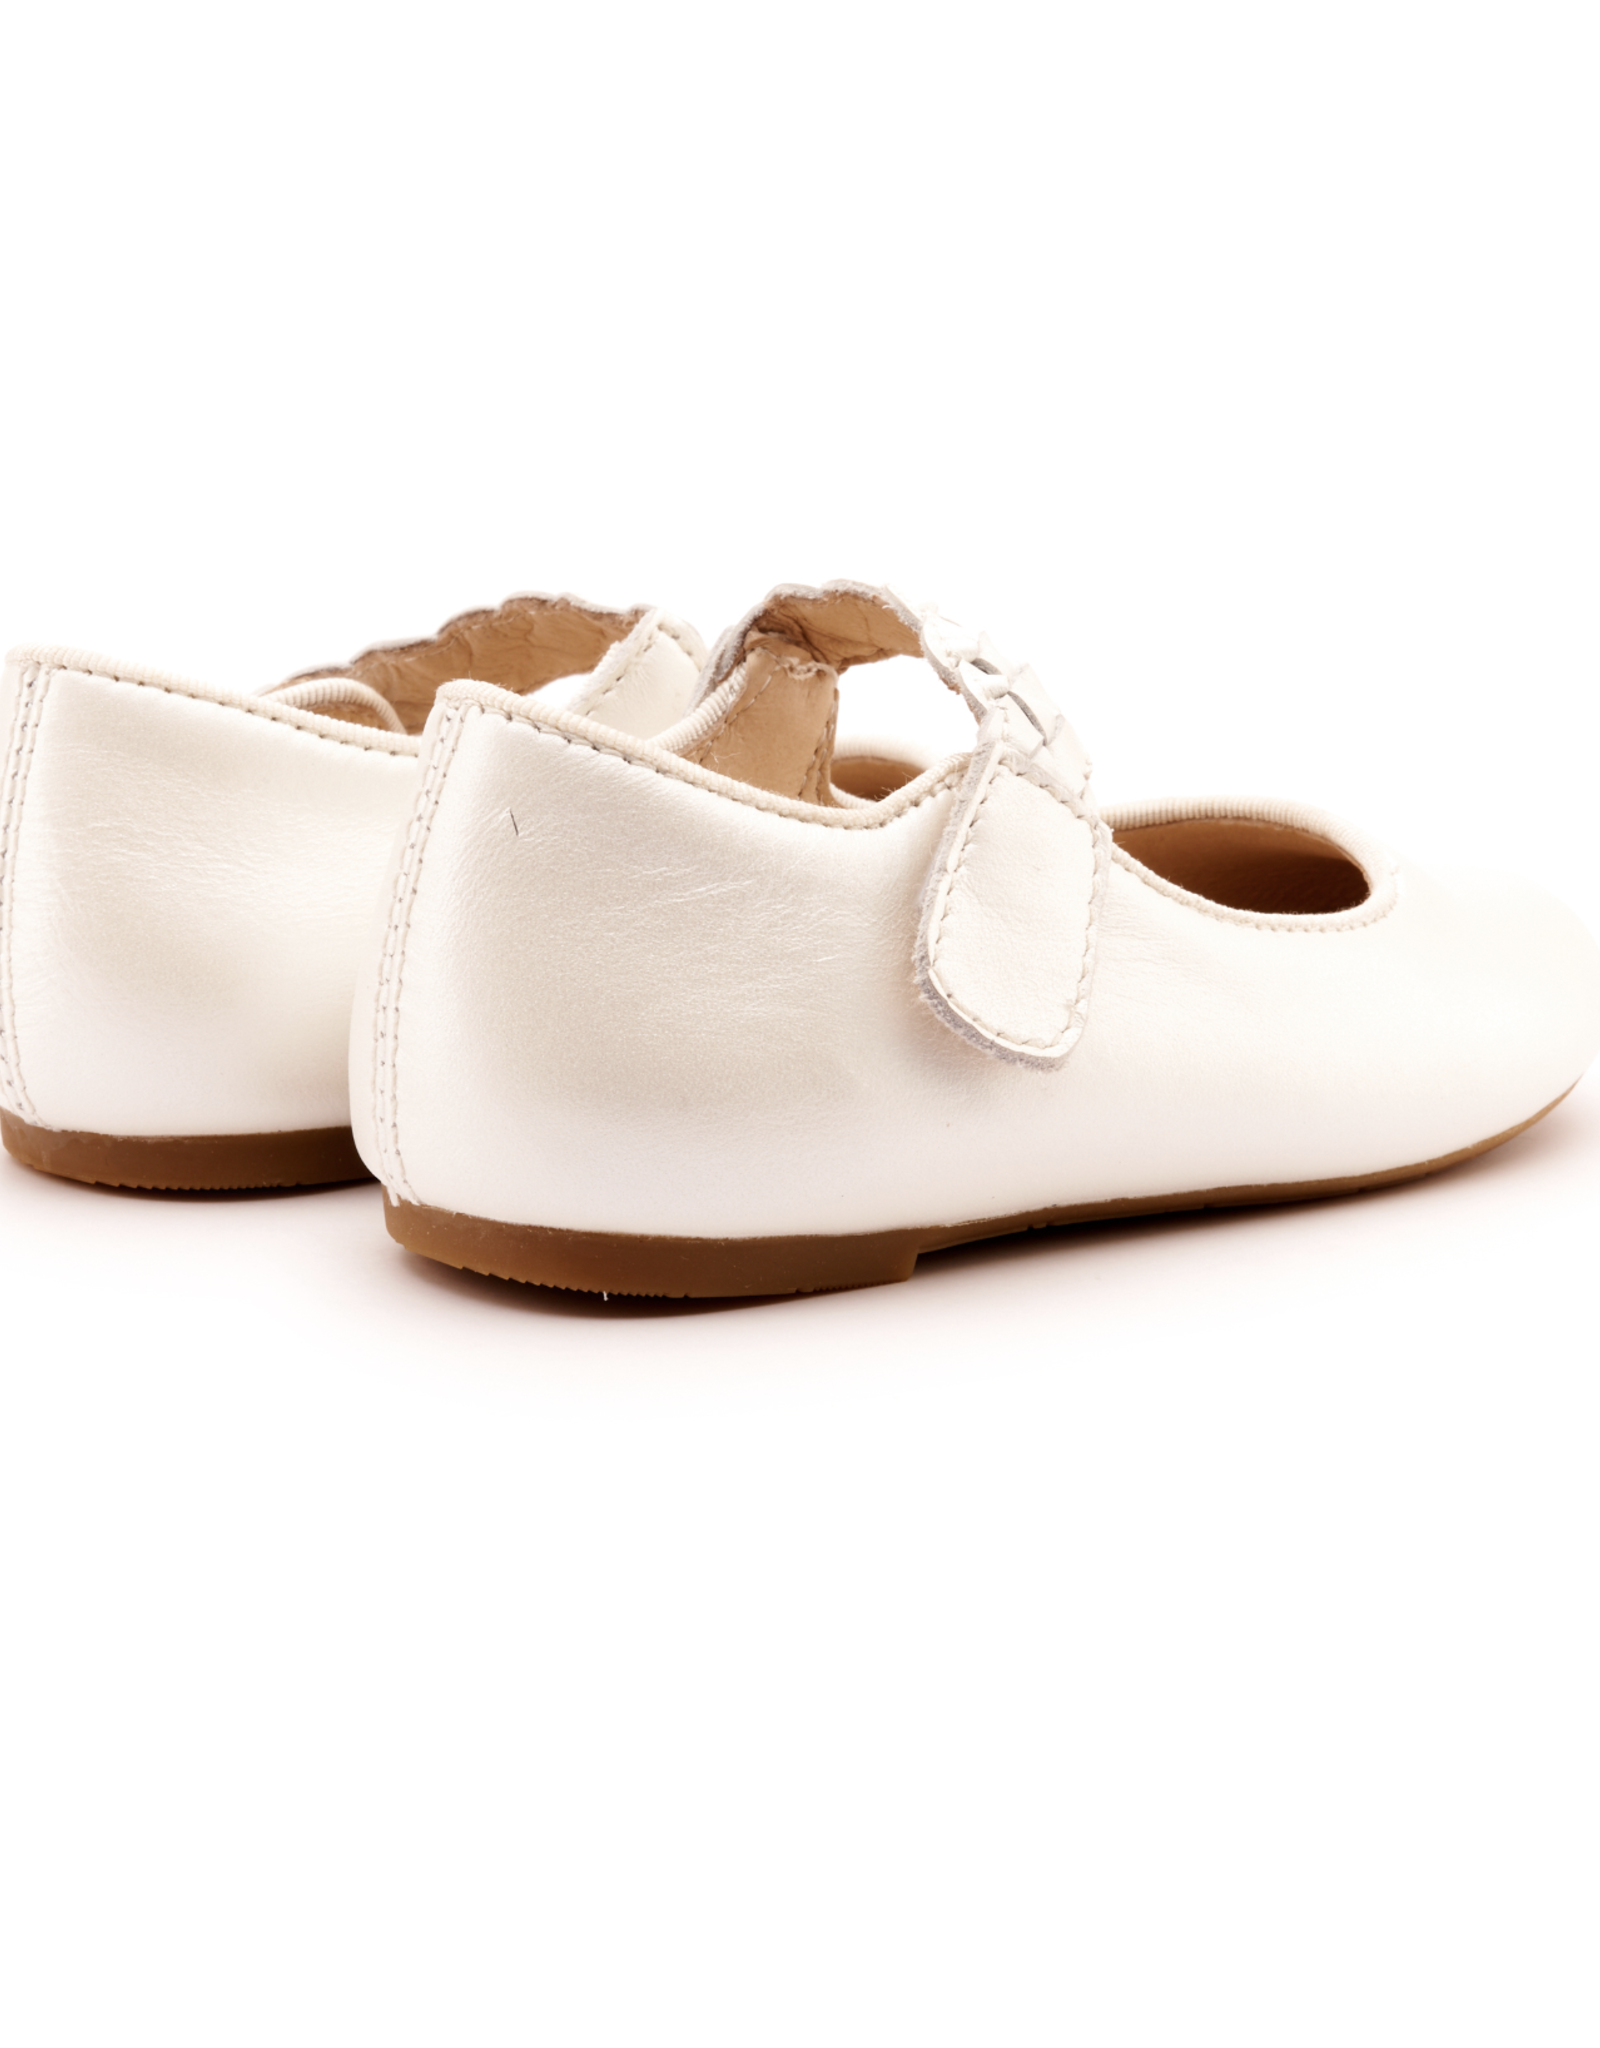 Old Soles Lady Plat White Pearl